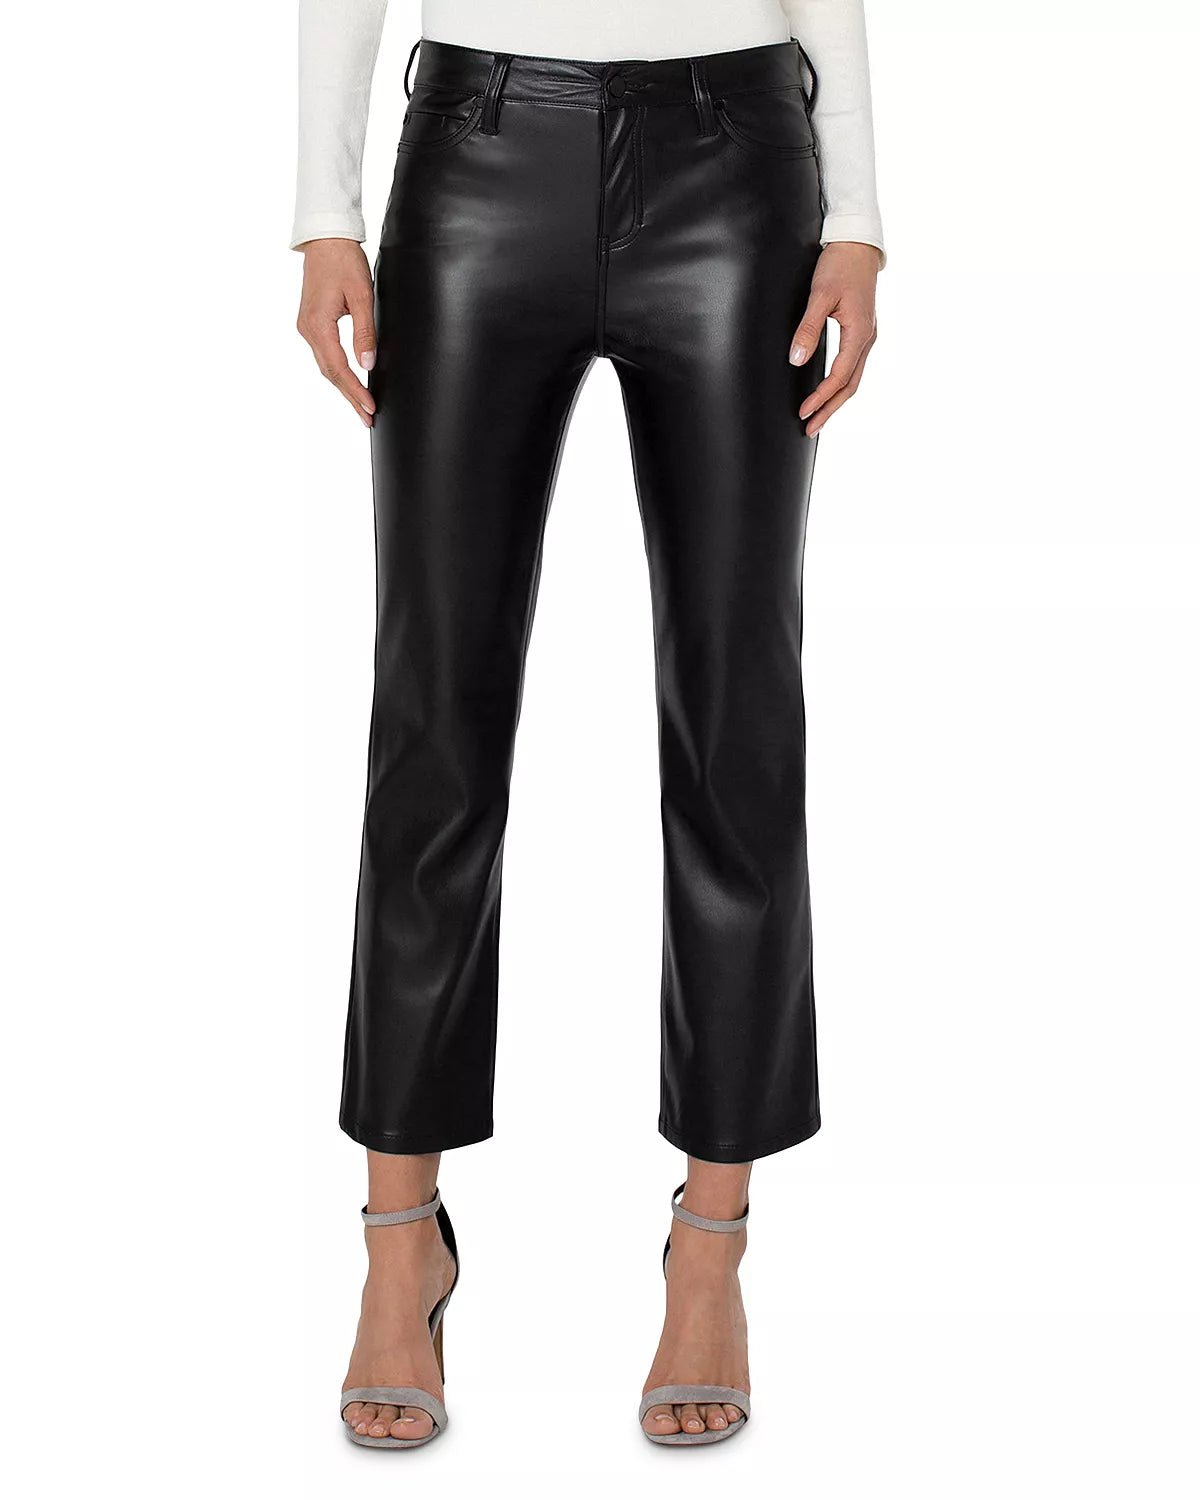 Liverpool Hannah Faux Leather Straight Ankle Pantsleather pants